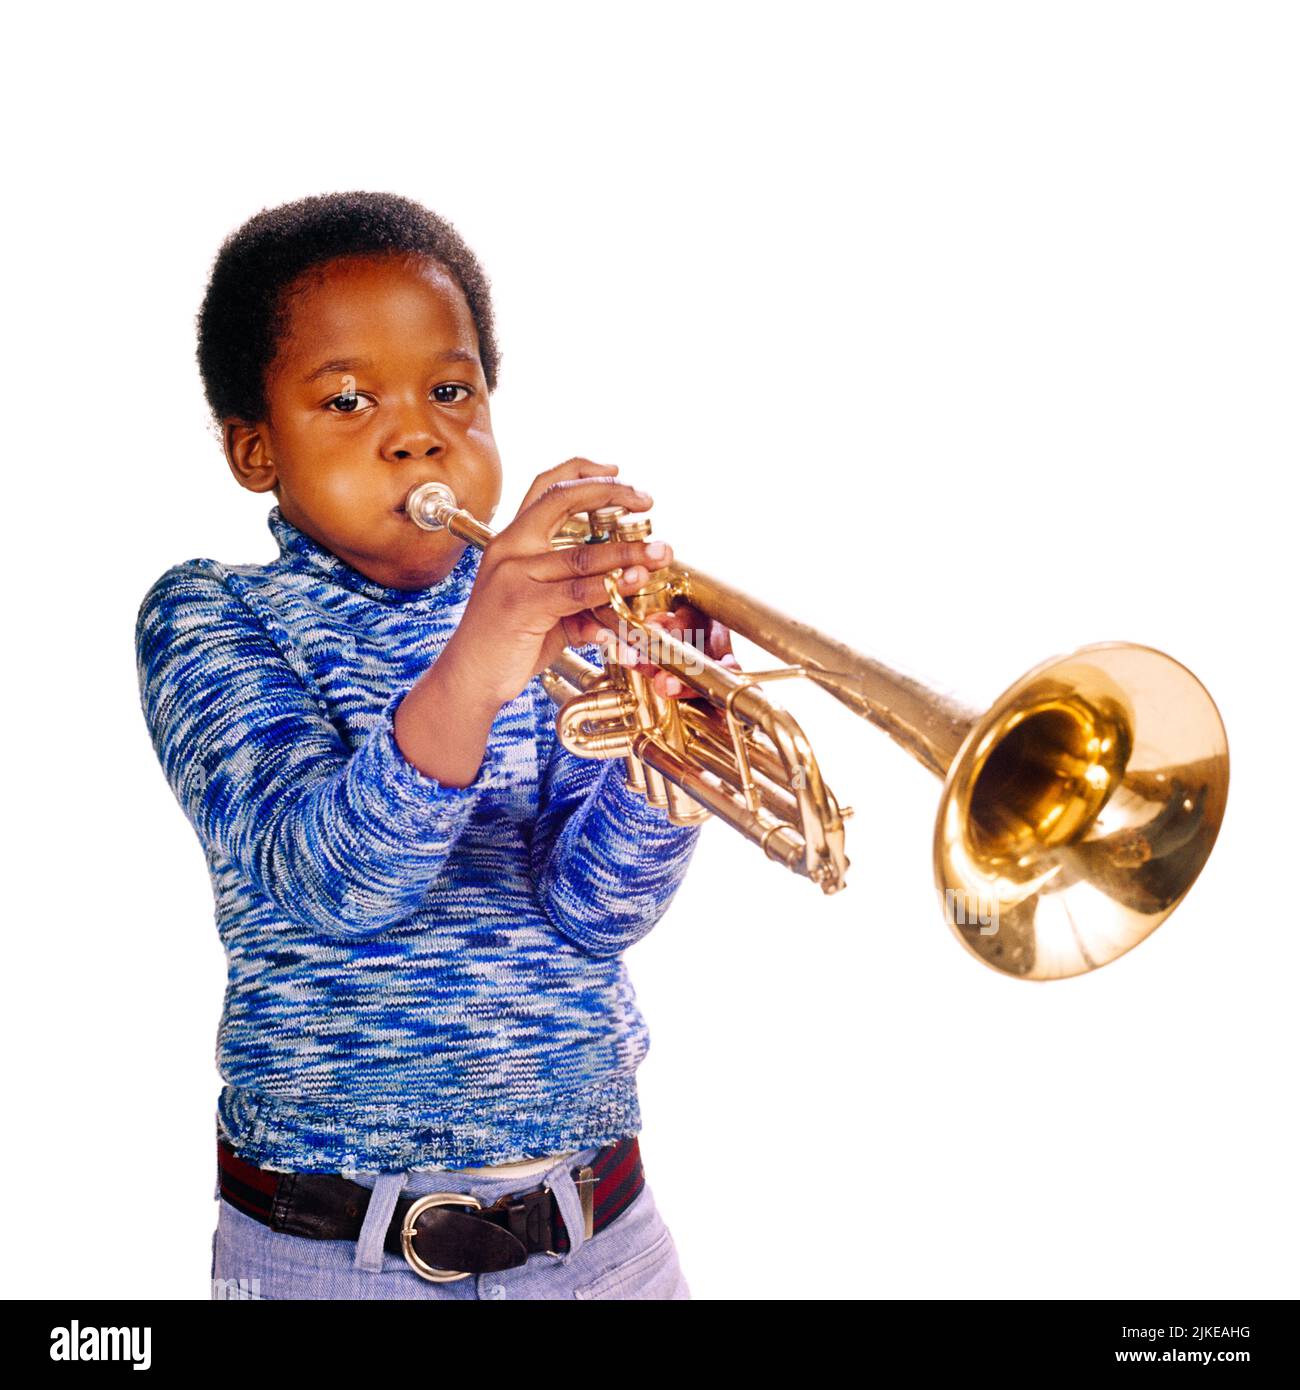 https://c8.alamy.com/comp/2JKEAHG/1970s-talented-young-african-american-boy-musician-looking-at-camera-cheeks-all-puffed-out-playing-trumpet-km3329-pht001-hars-copy-space-half-length-inspiration-males-brass-expressions-eye-contact-goals-success-performing-arts-dreams-happiness-performer-african-americans-african-american-young-man-knowledge-progress-black-ethnicity-pride-achievement-entertainer-musical-instrument-conceptual-stylish-purpose-solo-creativity-entertainers-growth-juveniles-performers-precision-relaxation-soloist-talent-talented-concentration-identity-old-fashioned-practicing-african-americans-2JKEAHG.jpg